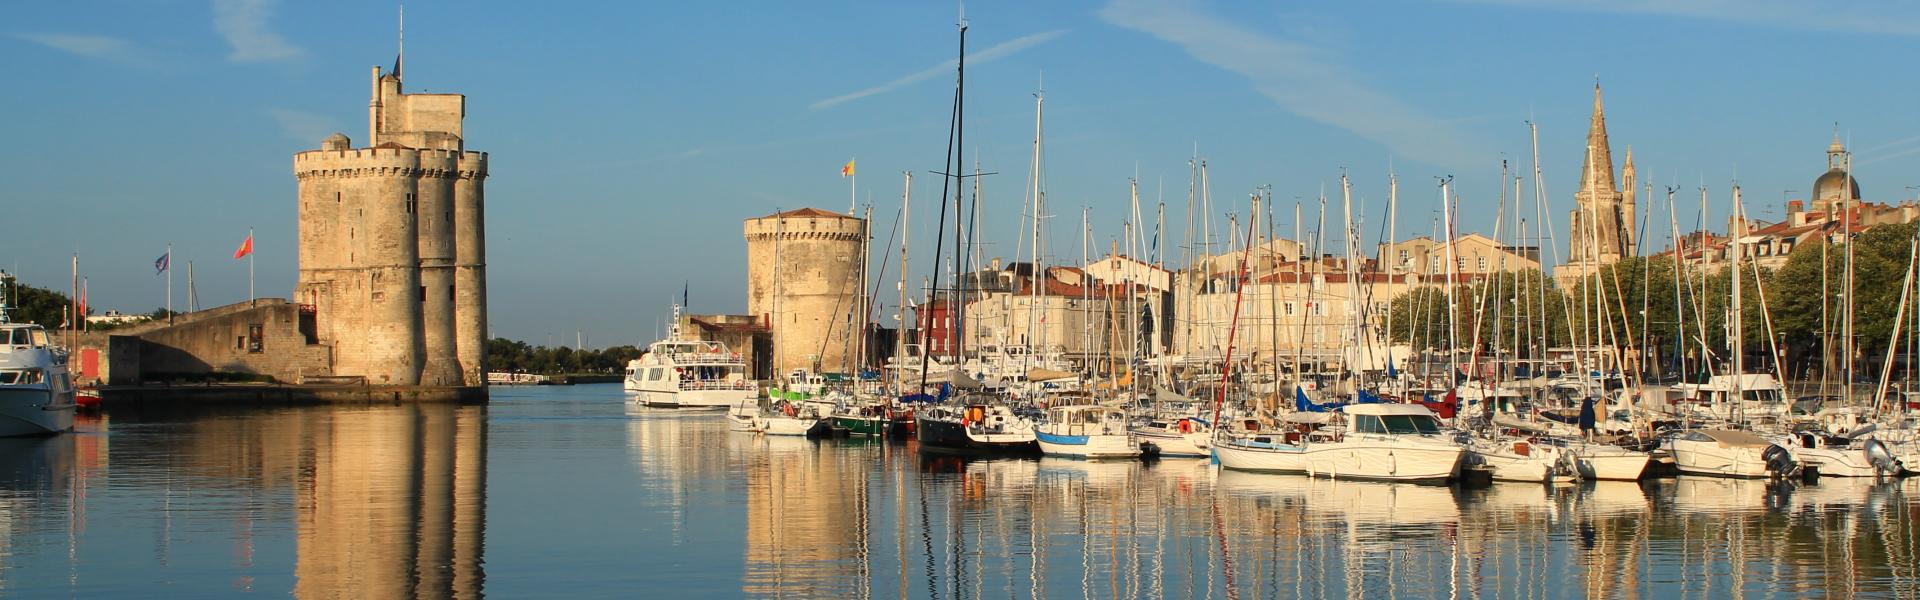 Find the perfect accommodation for your holiday in La Rochelle - Casamundo